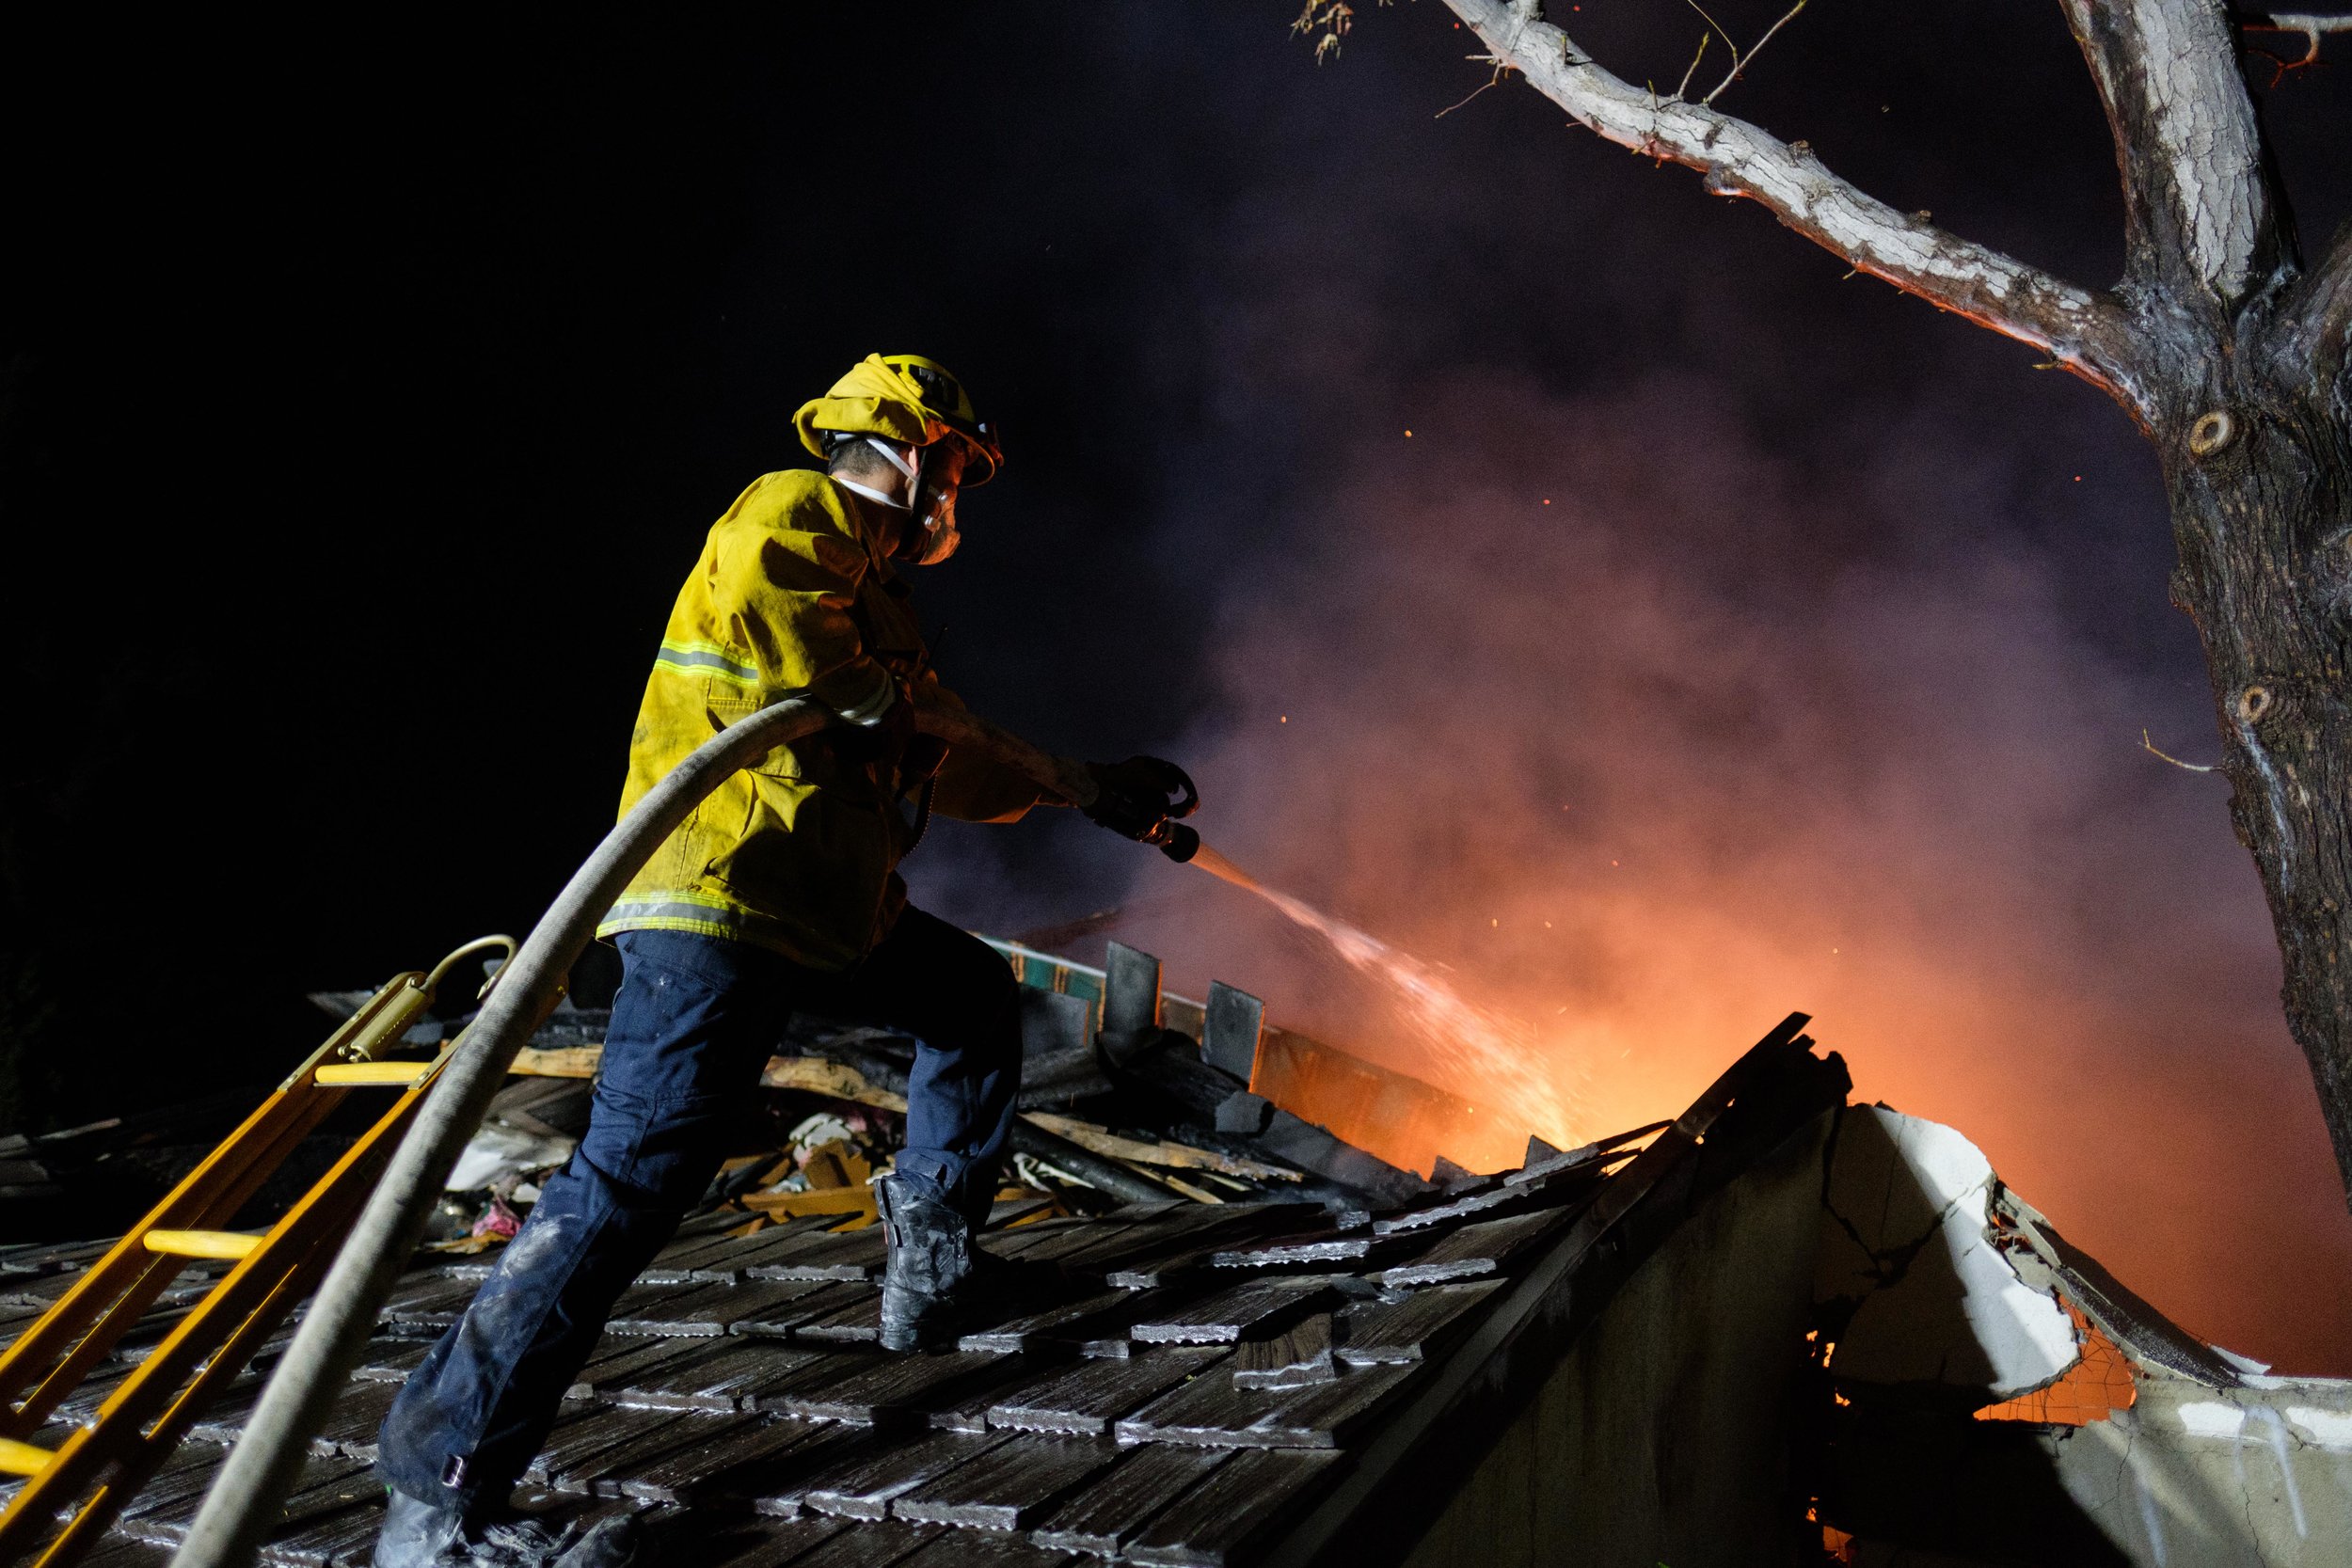     Los Angeles Fire Department firefighter on a rooftop, hosing down a flame inside the house. The LAFD has been battling the Skirball Fire since the early morning of Dec. 6, 2017. In Los Angeles, Calif. (Photo by Jayrol San Jose) 